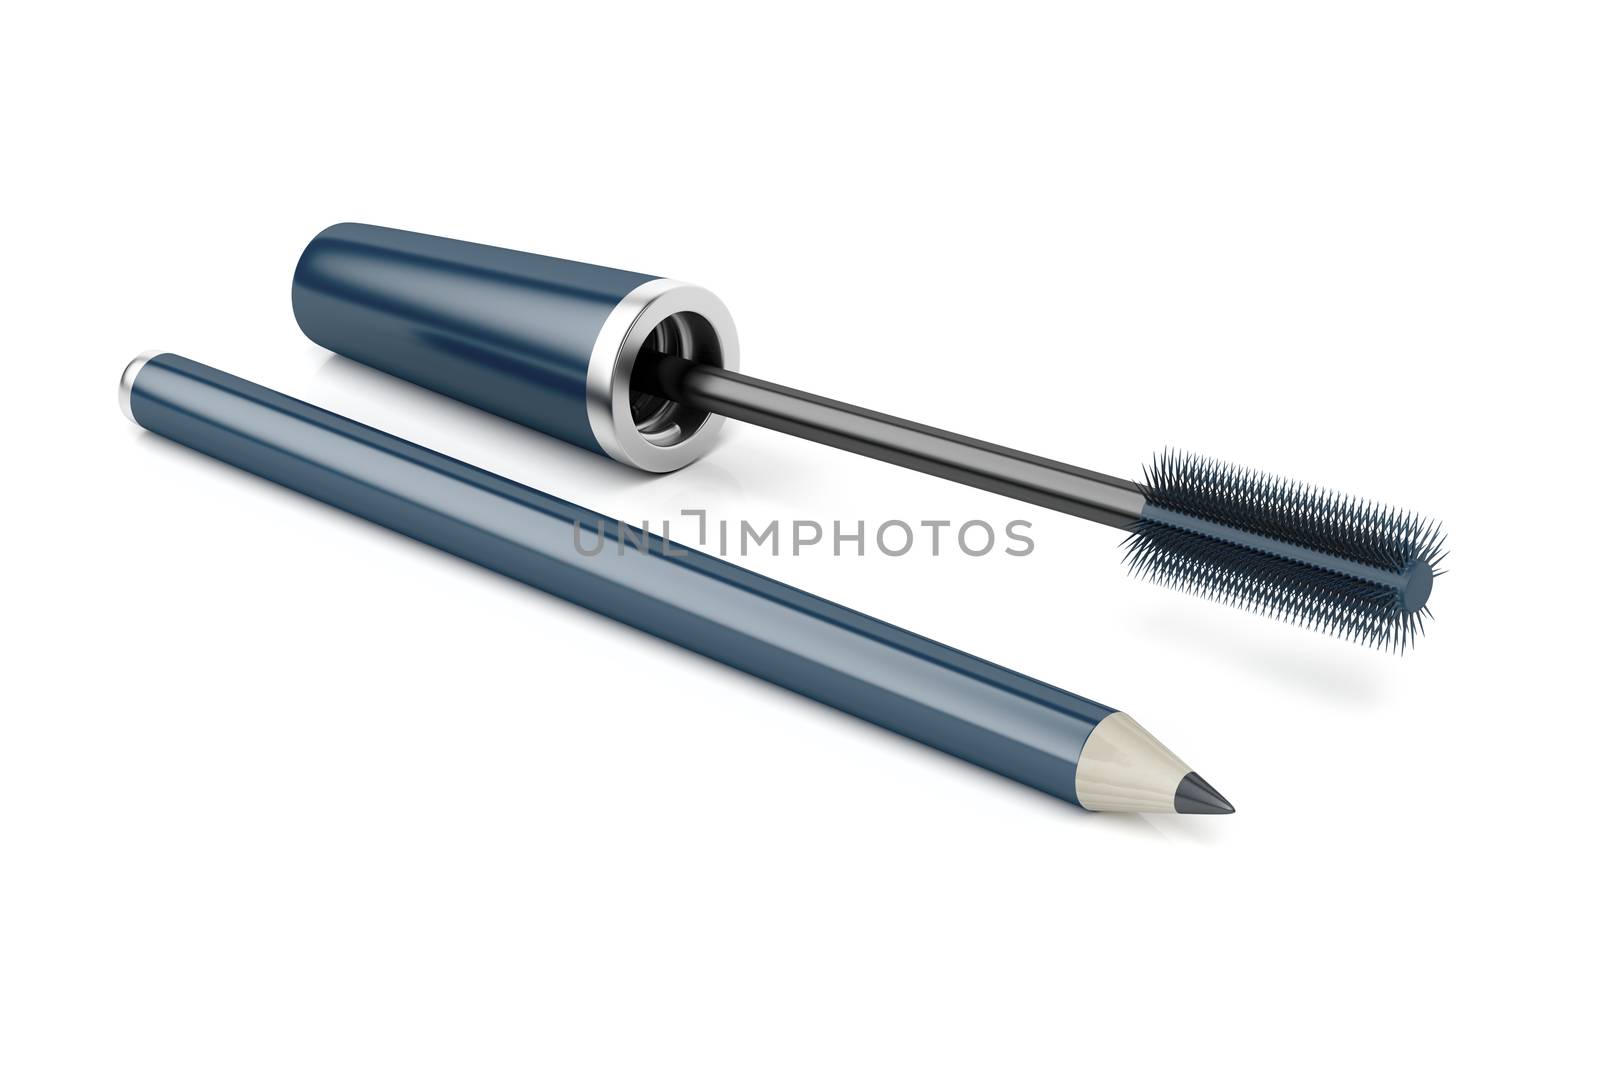 Mascara and eye pencil by magraphics